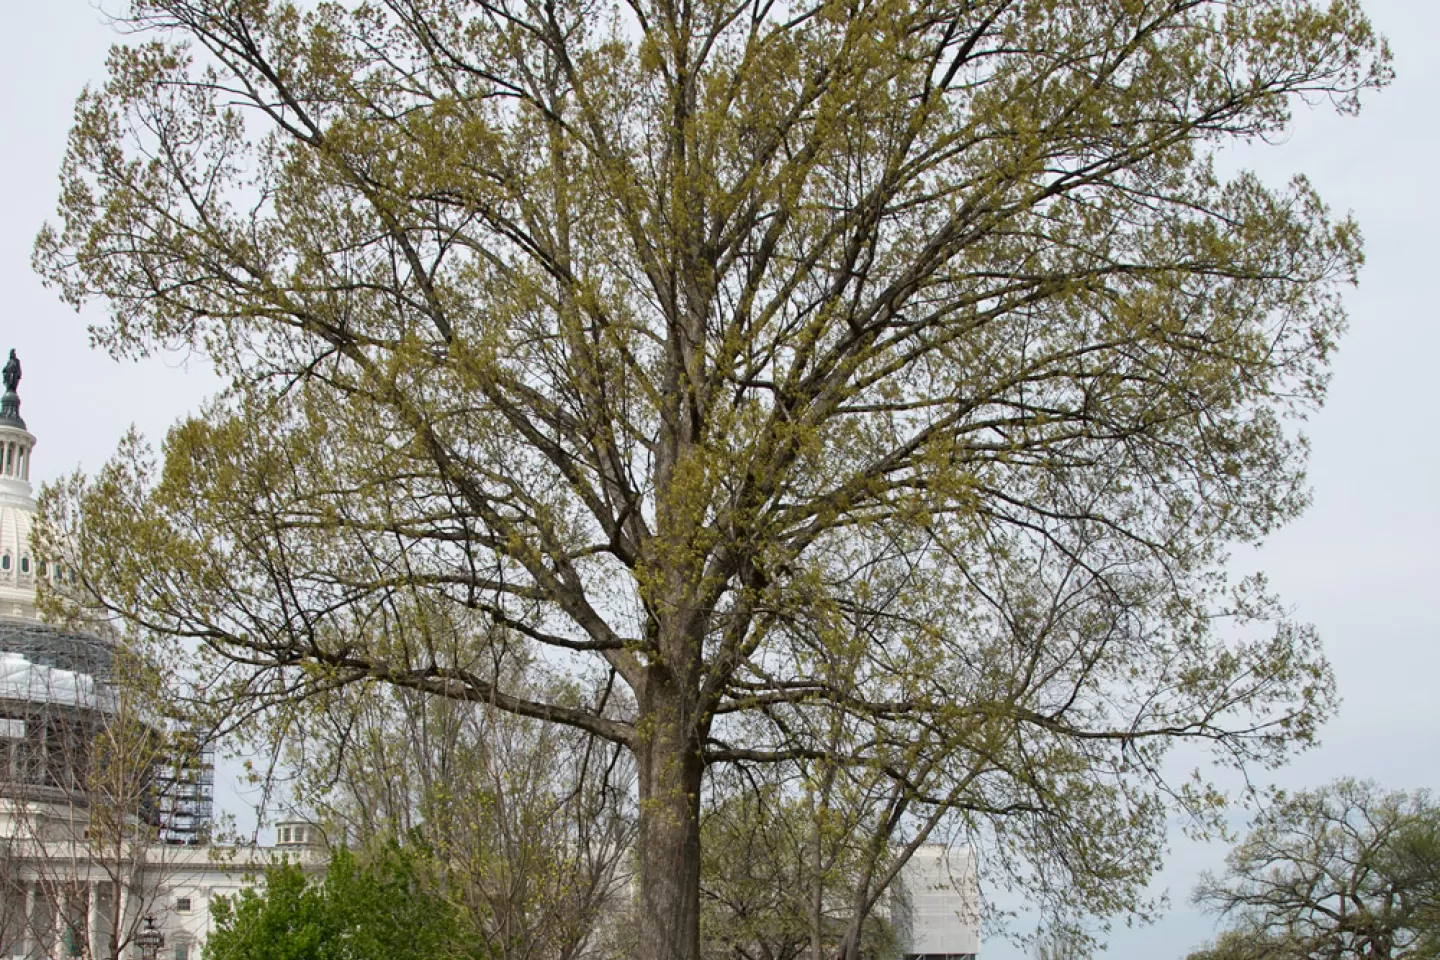 The Senator Thomas P. Gore tree on the U.S. Capitol Grounds during spring.